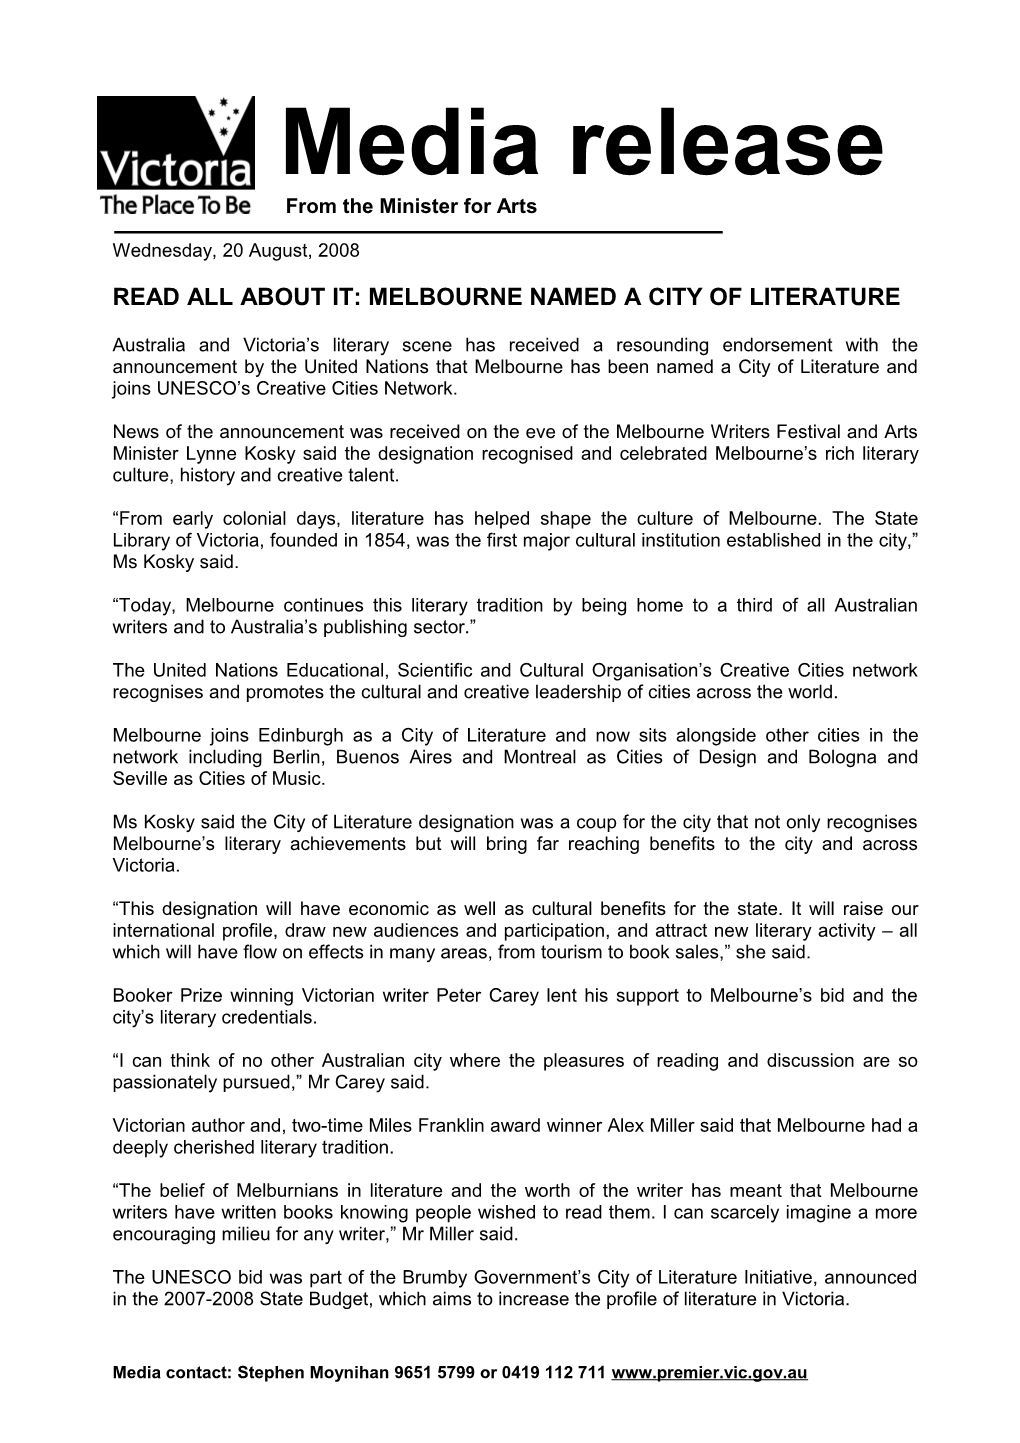 Read All About It: Melbourne Named a City Ofliterature